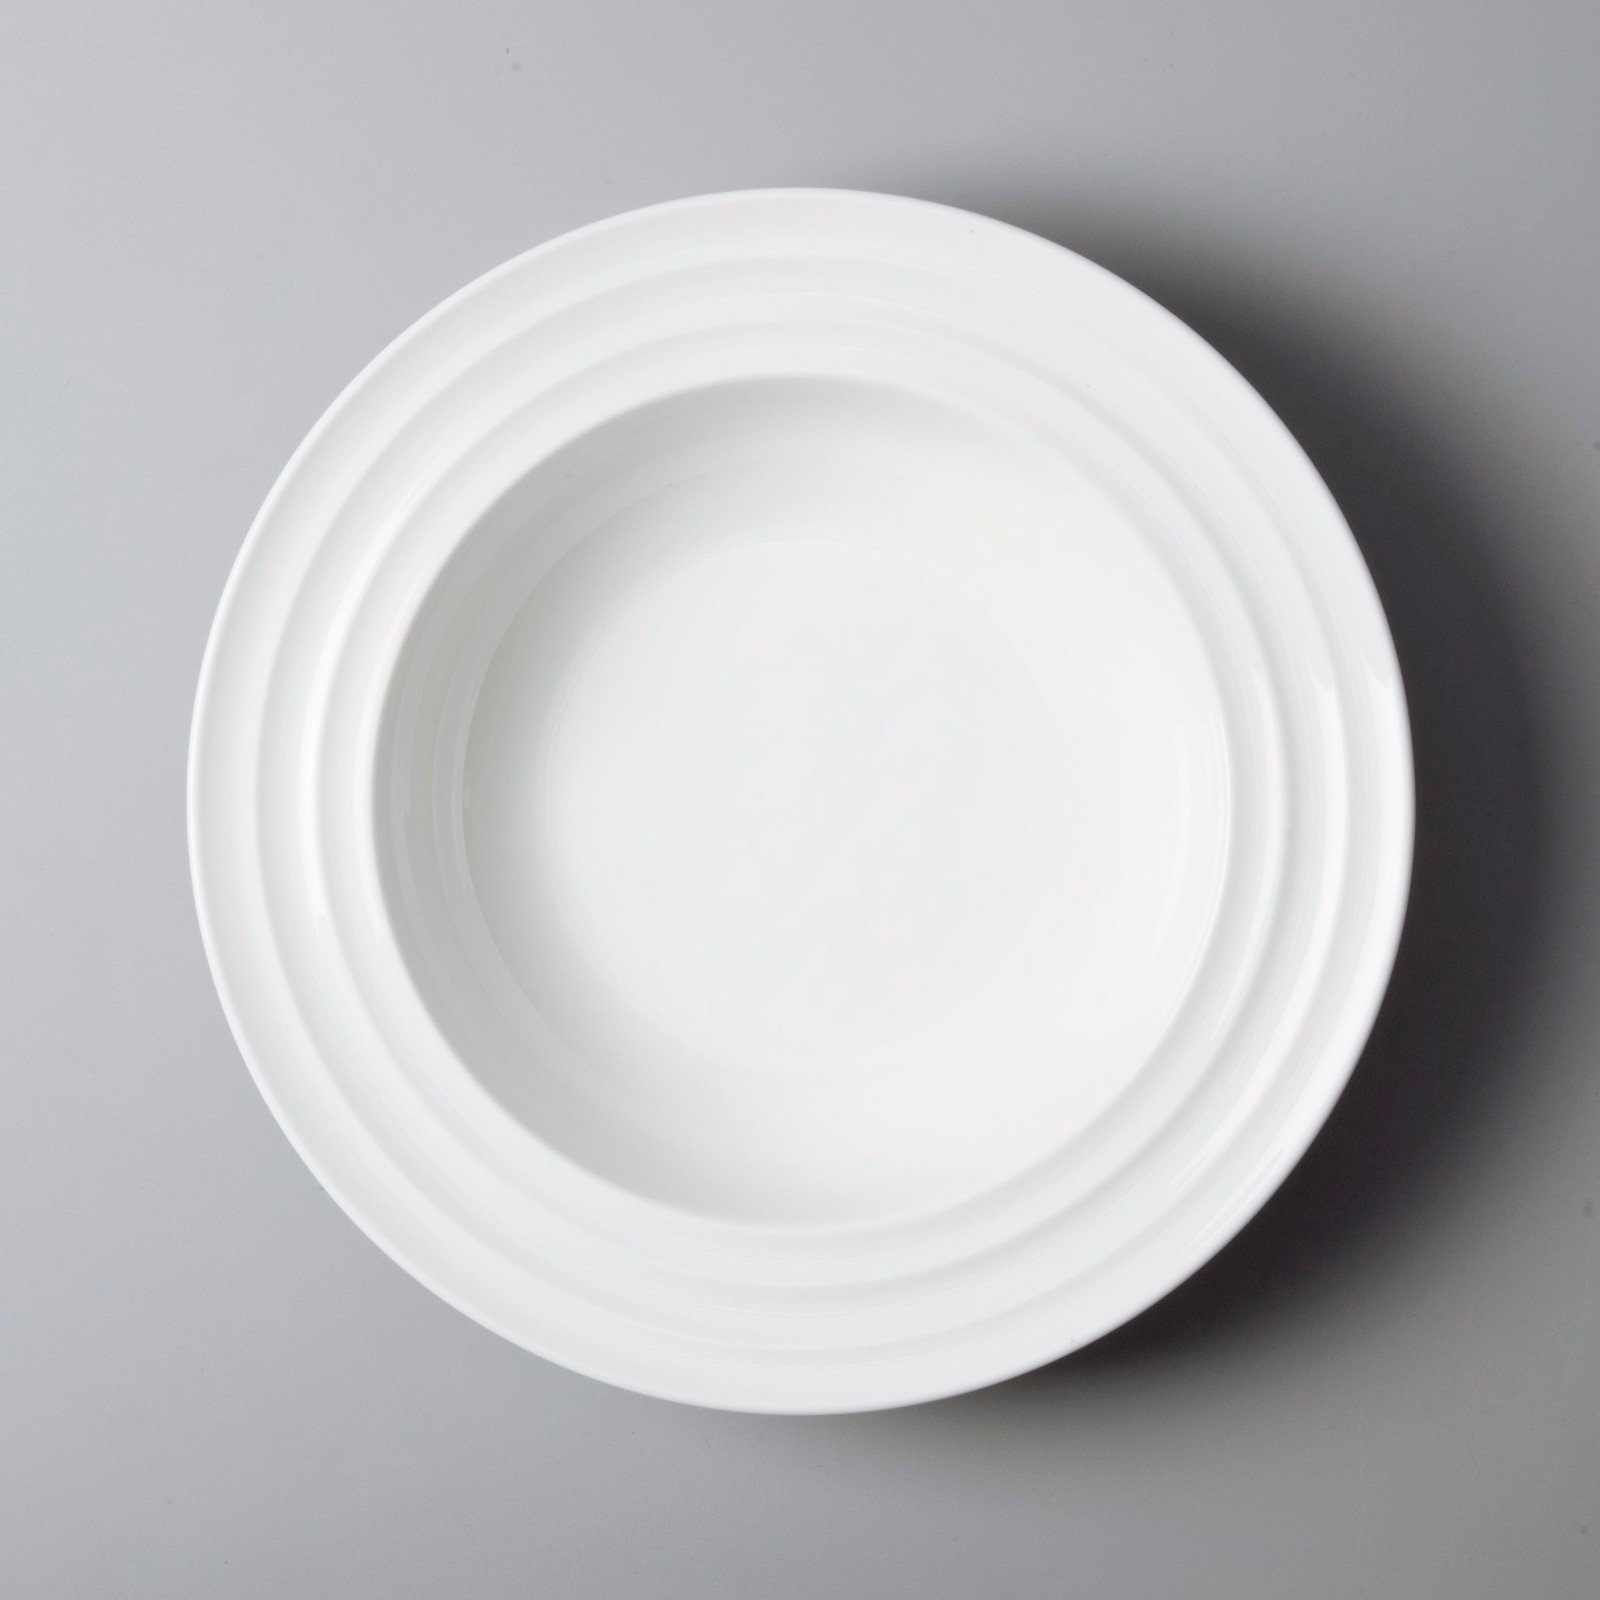 glaze commercial restaurant plates German style directly sale for bistro-4